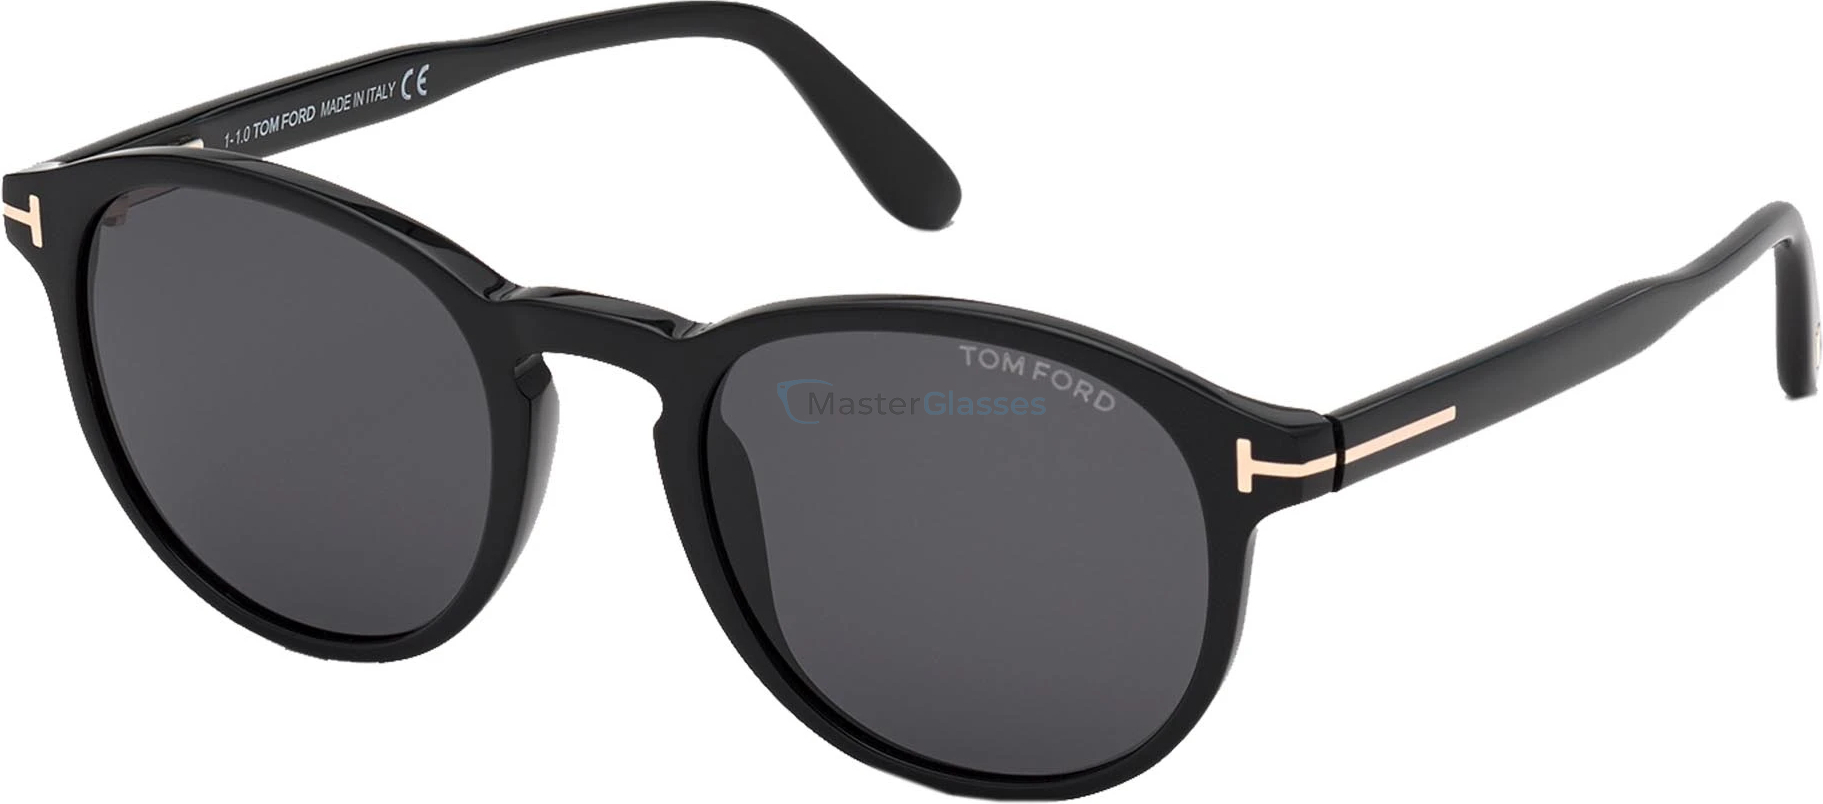   Tom Ford TF 834 01A 50